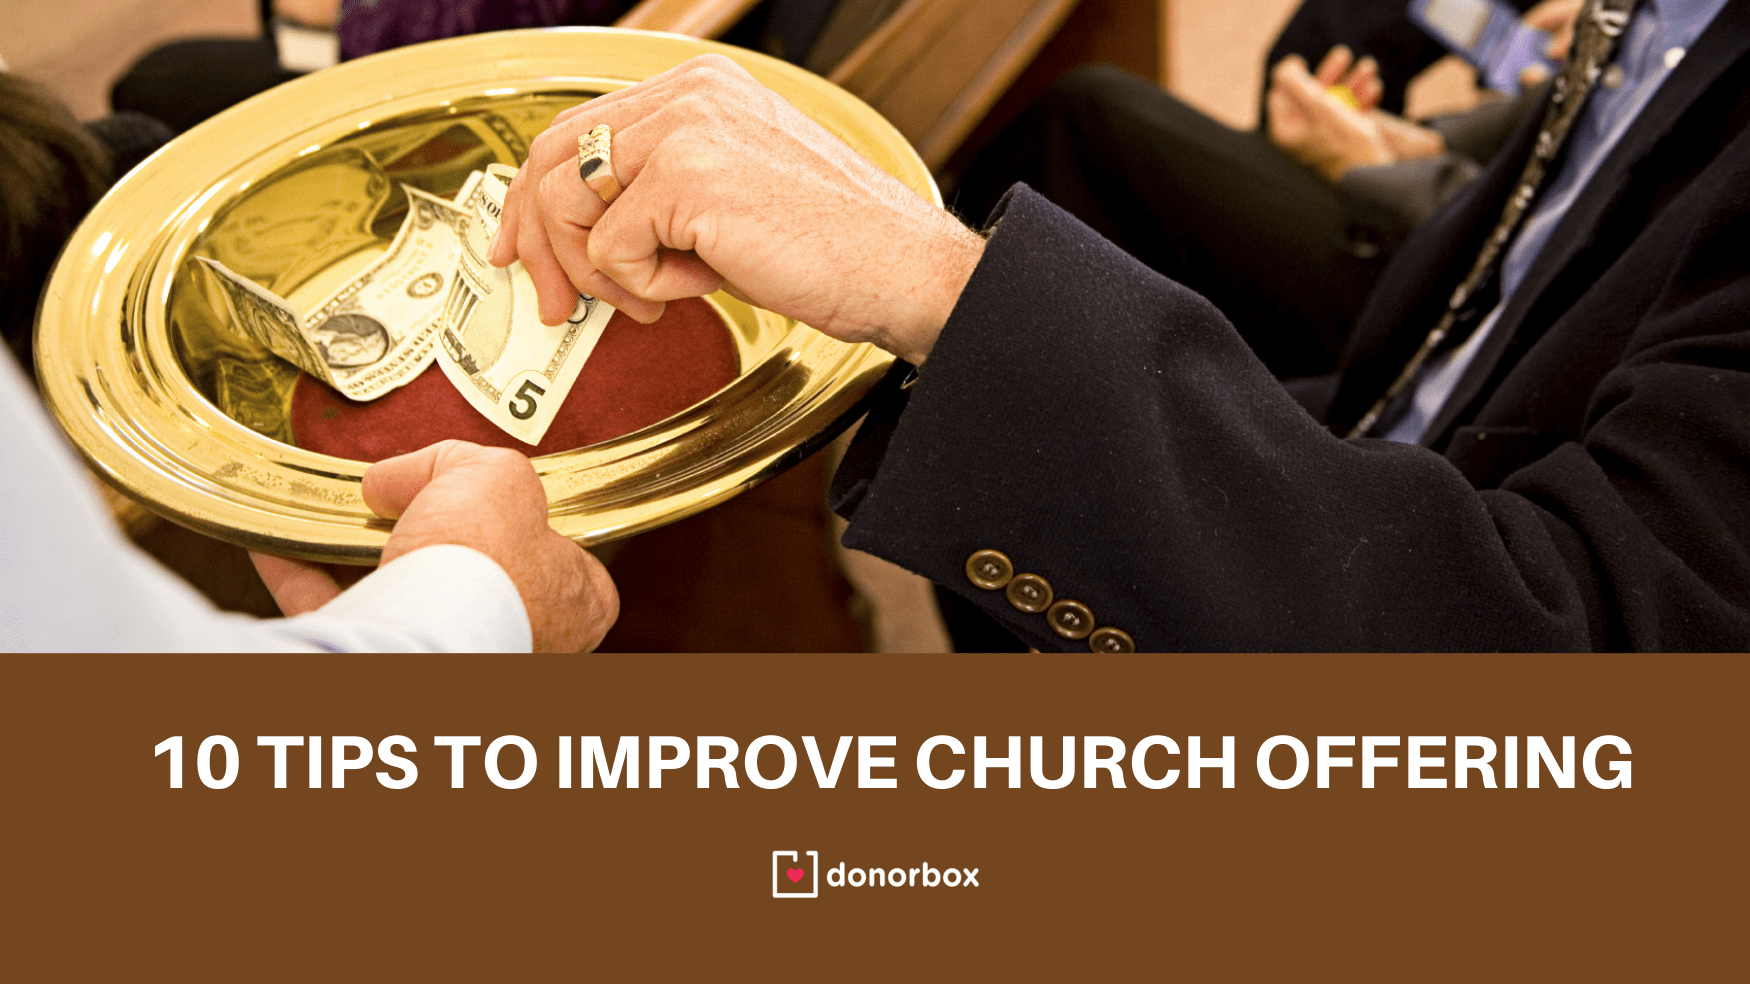 10 Creative Ways to Collect & Improve Offering at Your Church